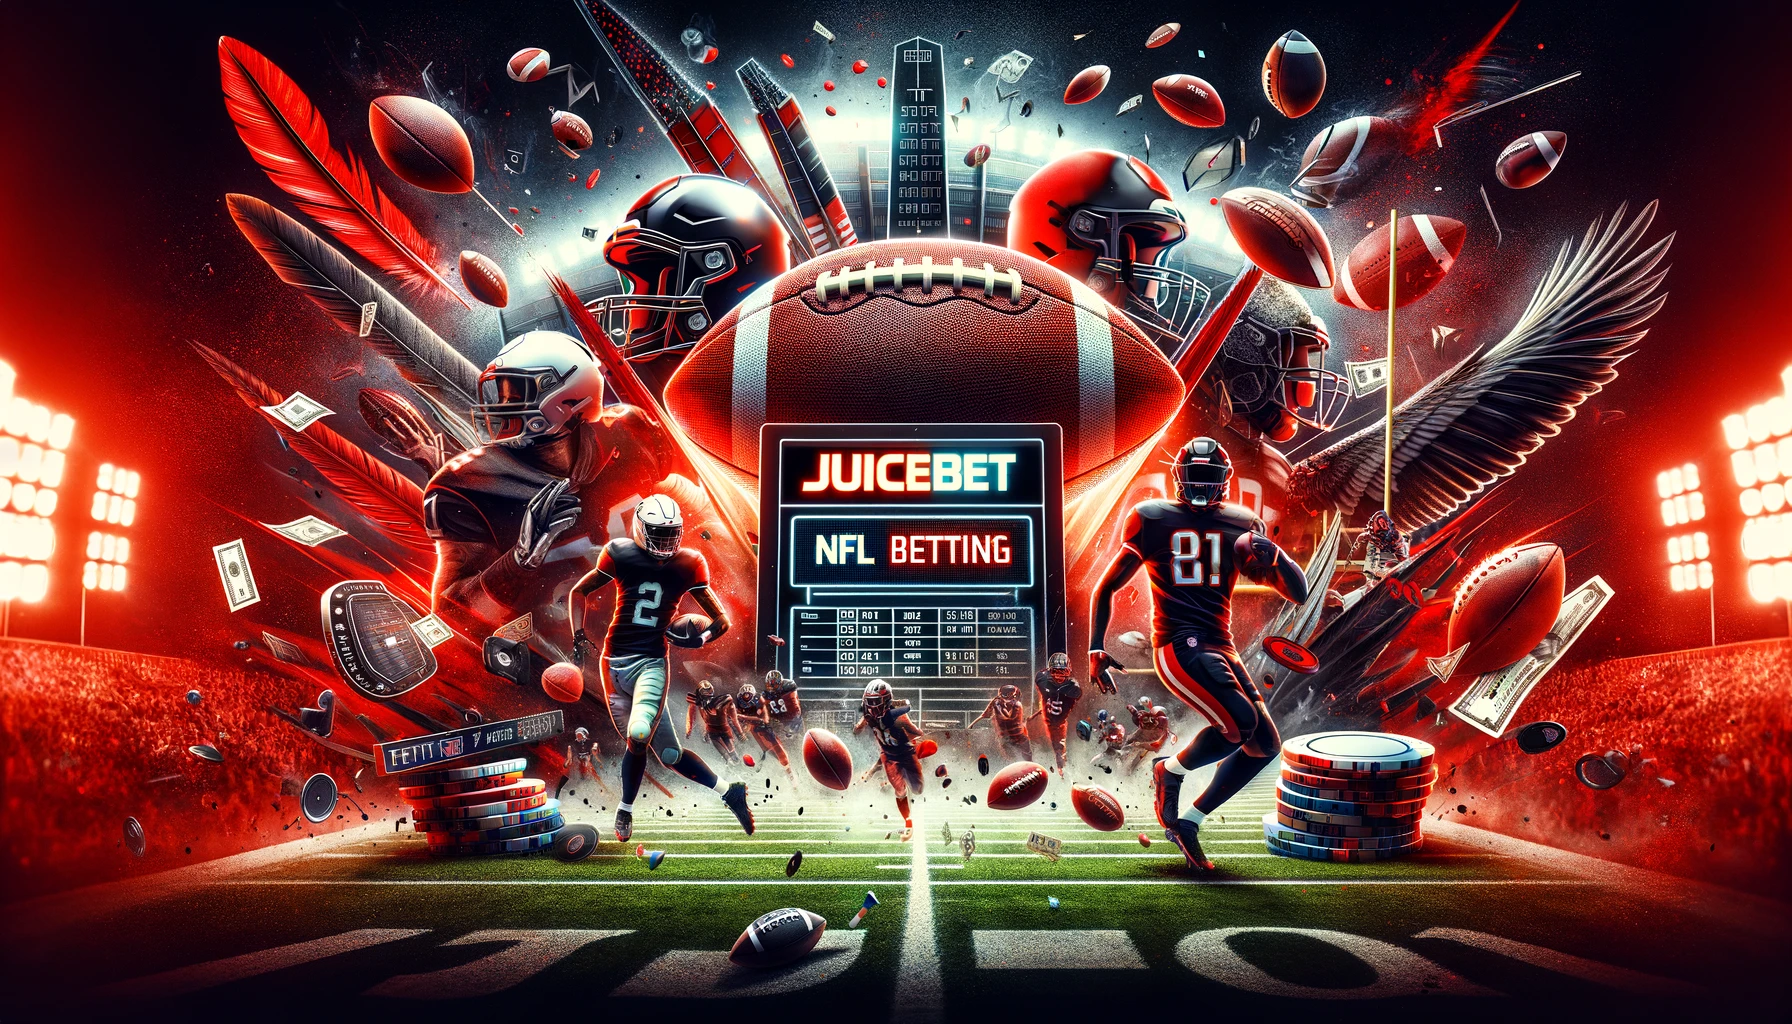 Score big: excelling in NFL betting with Juicebet! 2